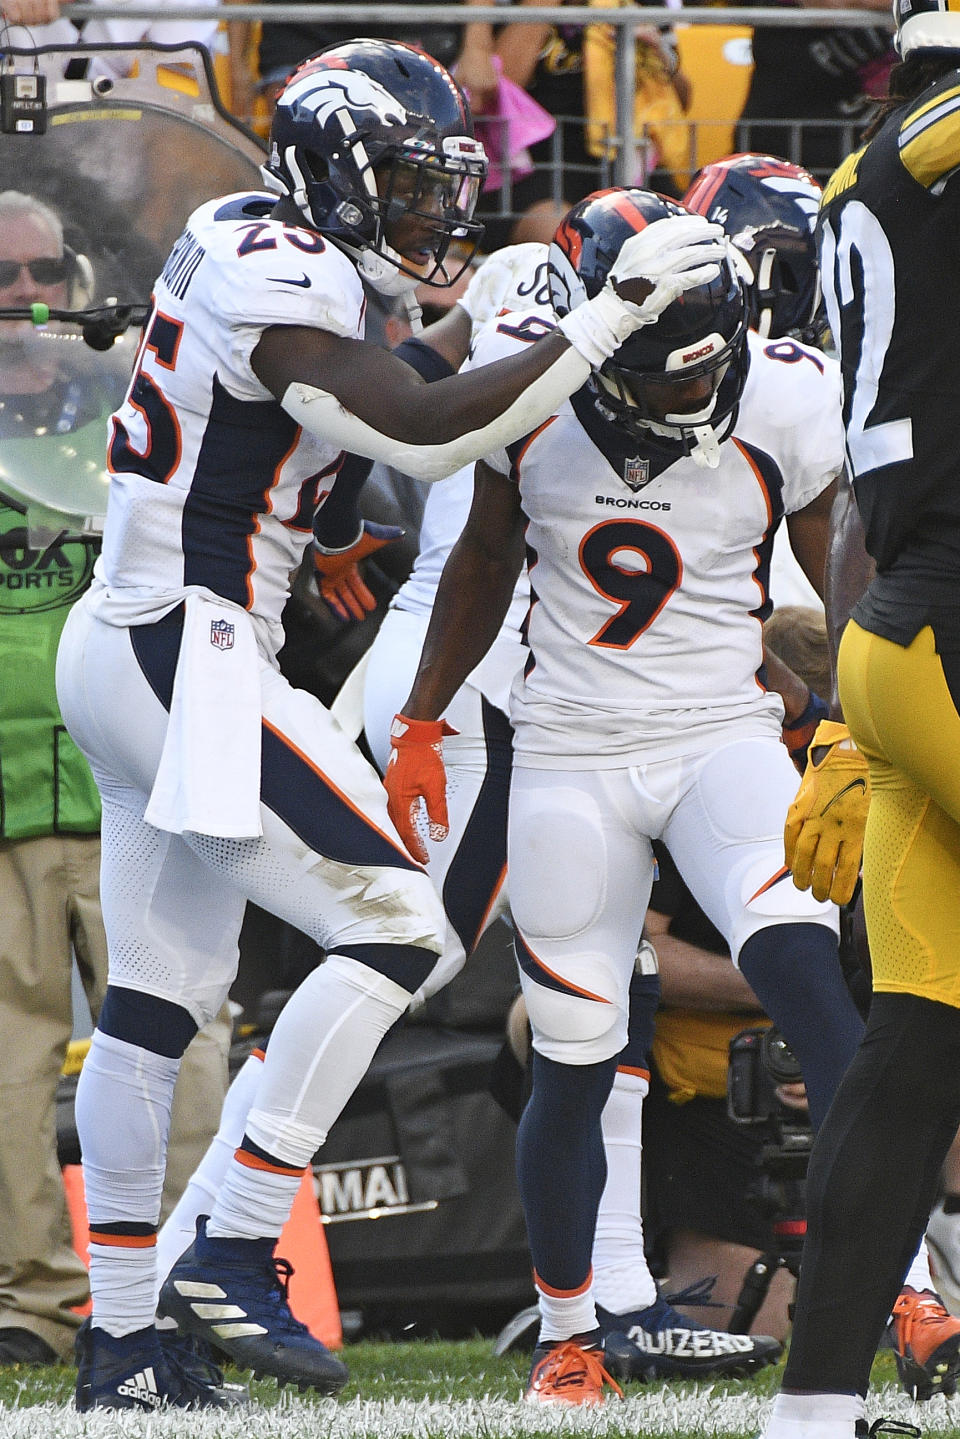 Denver Broncos wide receiver Kendall Hinton (9) celebrates with Melvin Gordon (25) after scoring a touchdown on a pass from quarterback Teddy Bridgewater during the second half of an NFL football game against the Pittsburgh Steelers in Pittsburgh, Sunday, Oct. 10, 2021. (AP Photo/Don Wright)